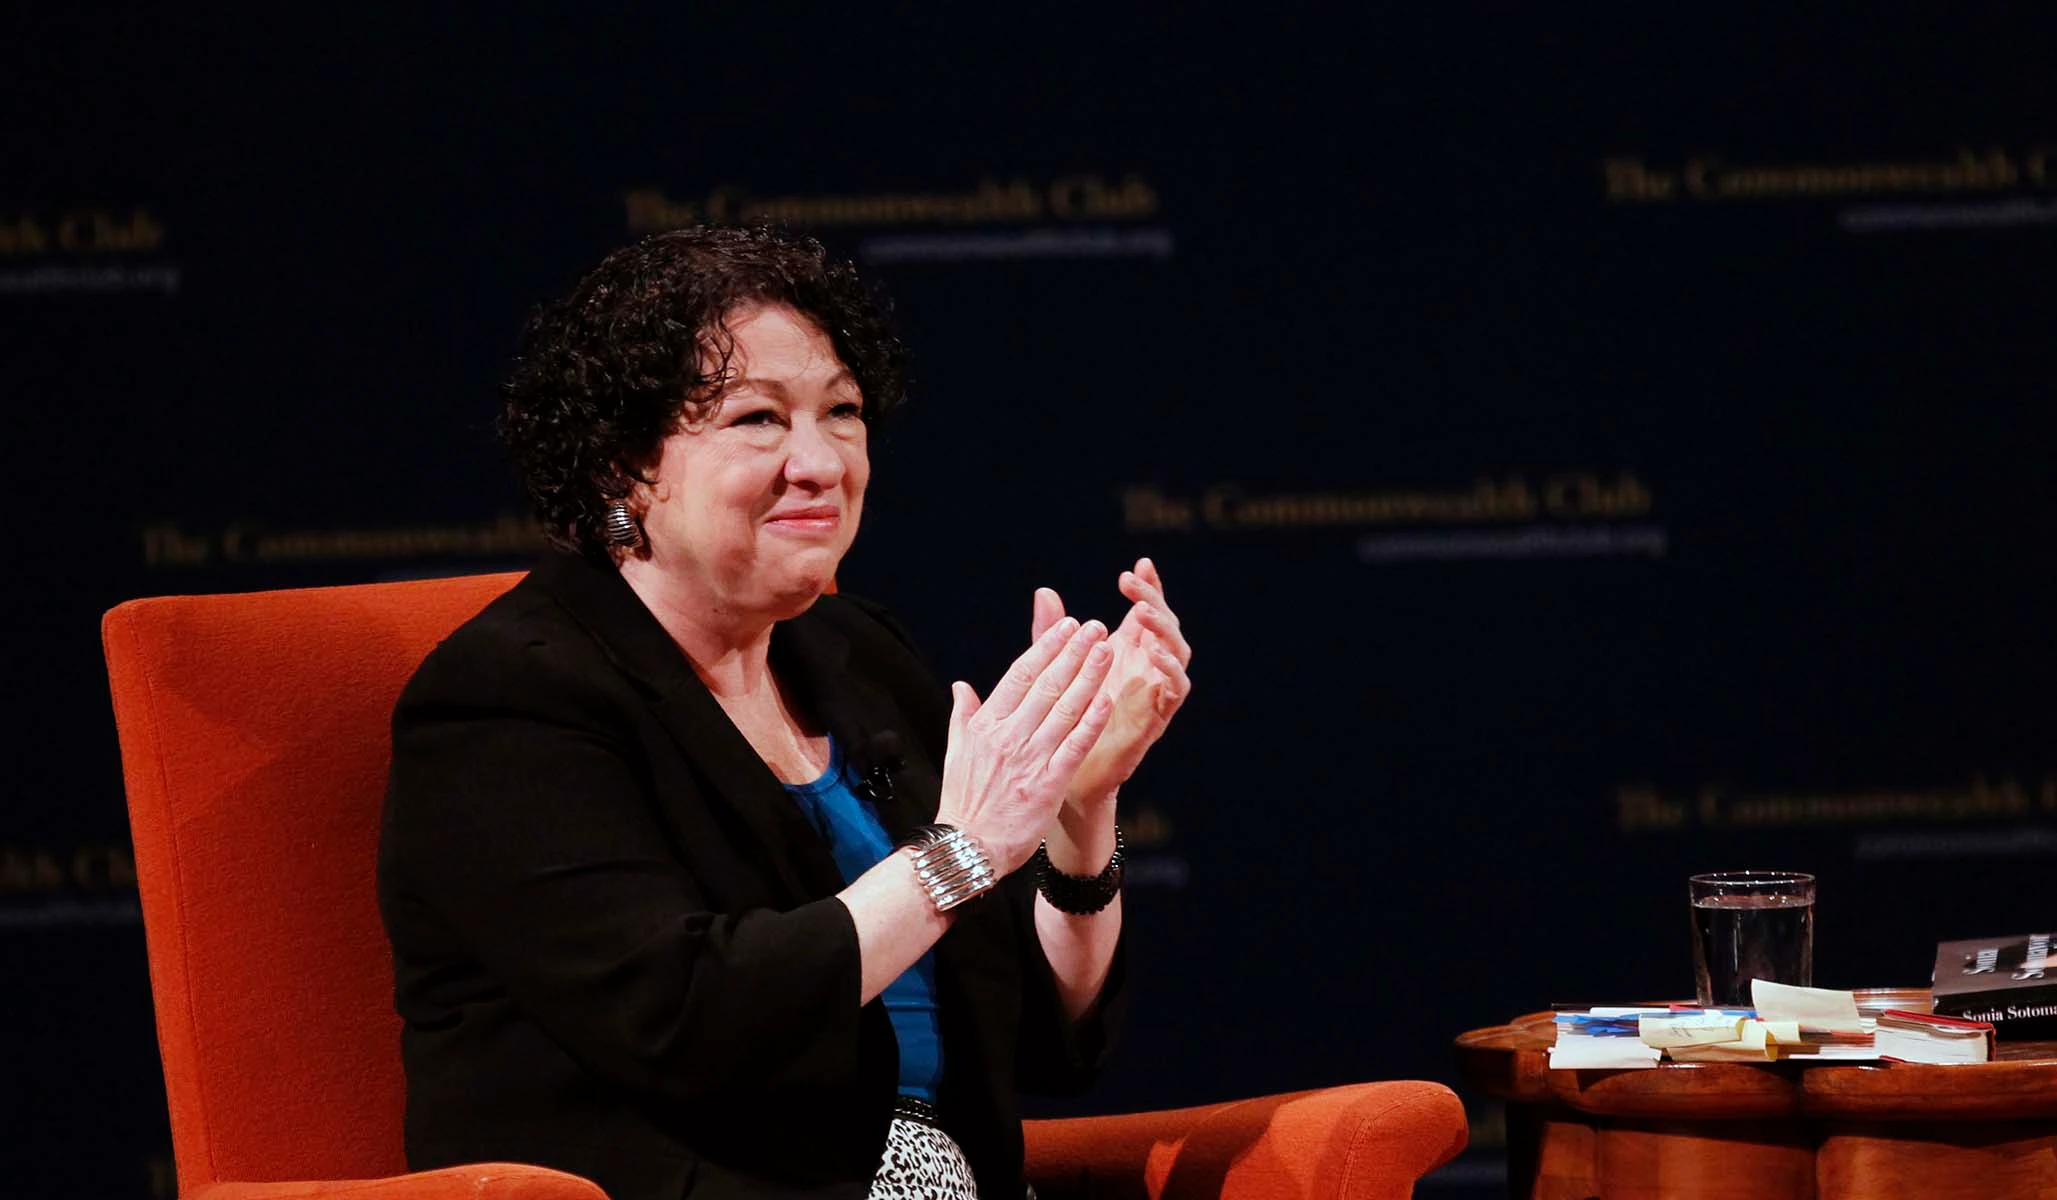 Supreme Court Justice Sonia Sotomayor falsely claimed that the Pulse nightclub shooting was a targeted hate crime against the LGBT community in her dissent opinion.